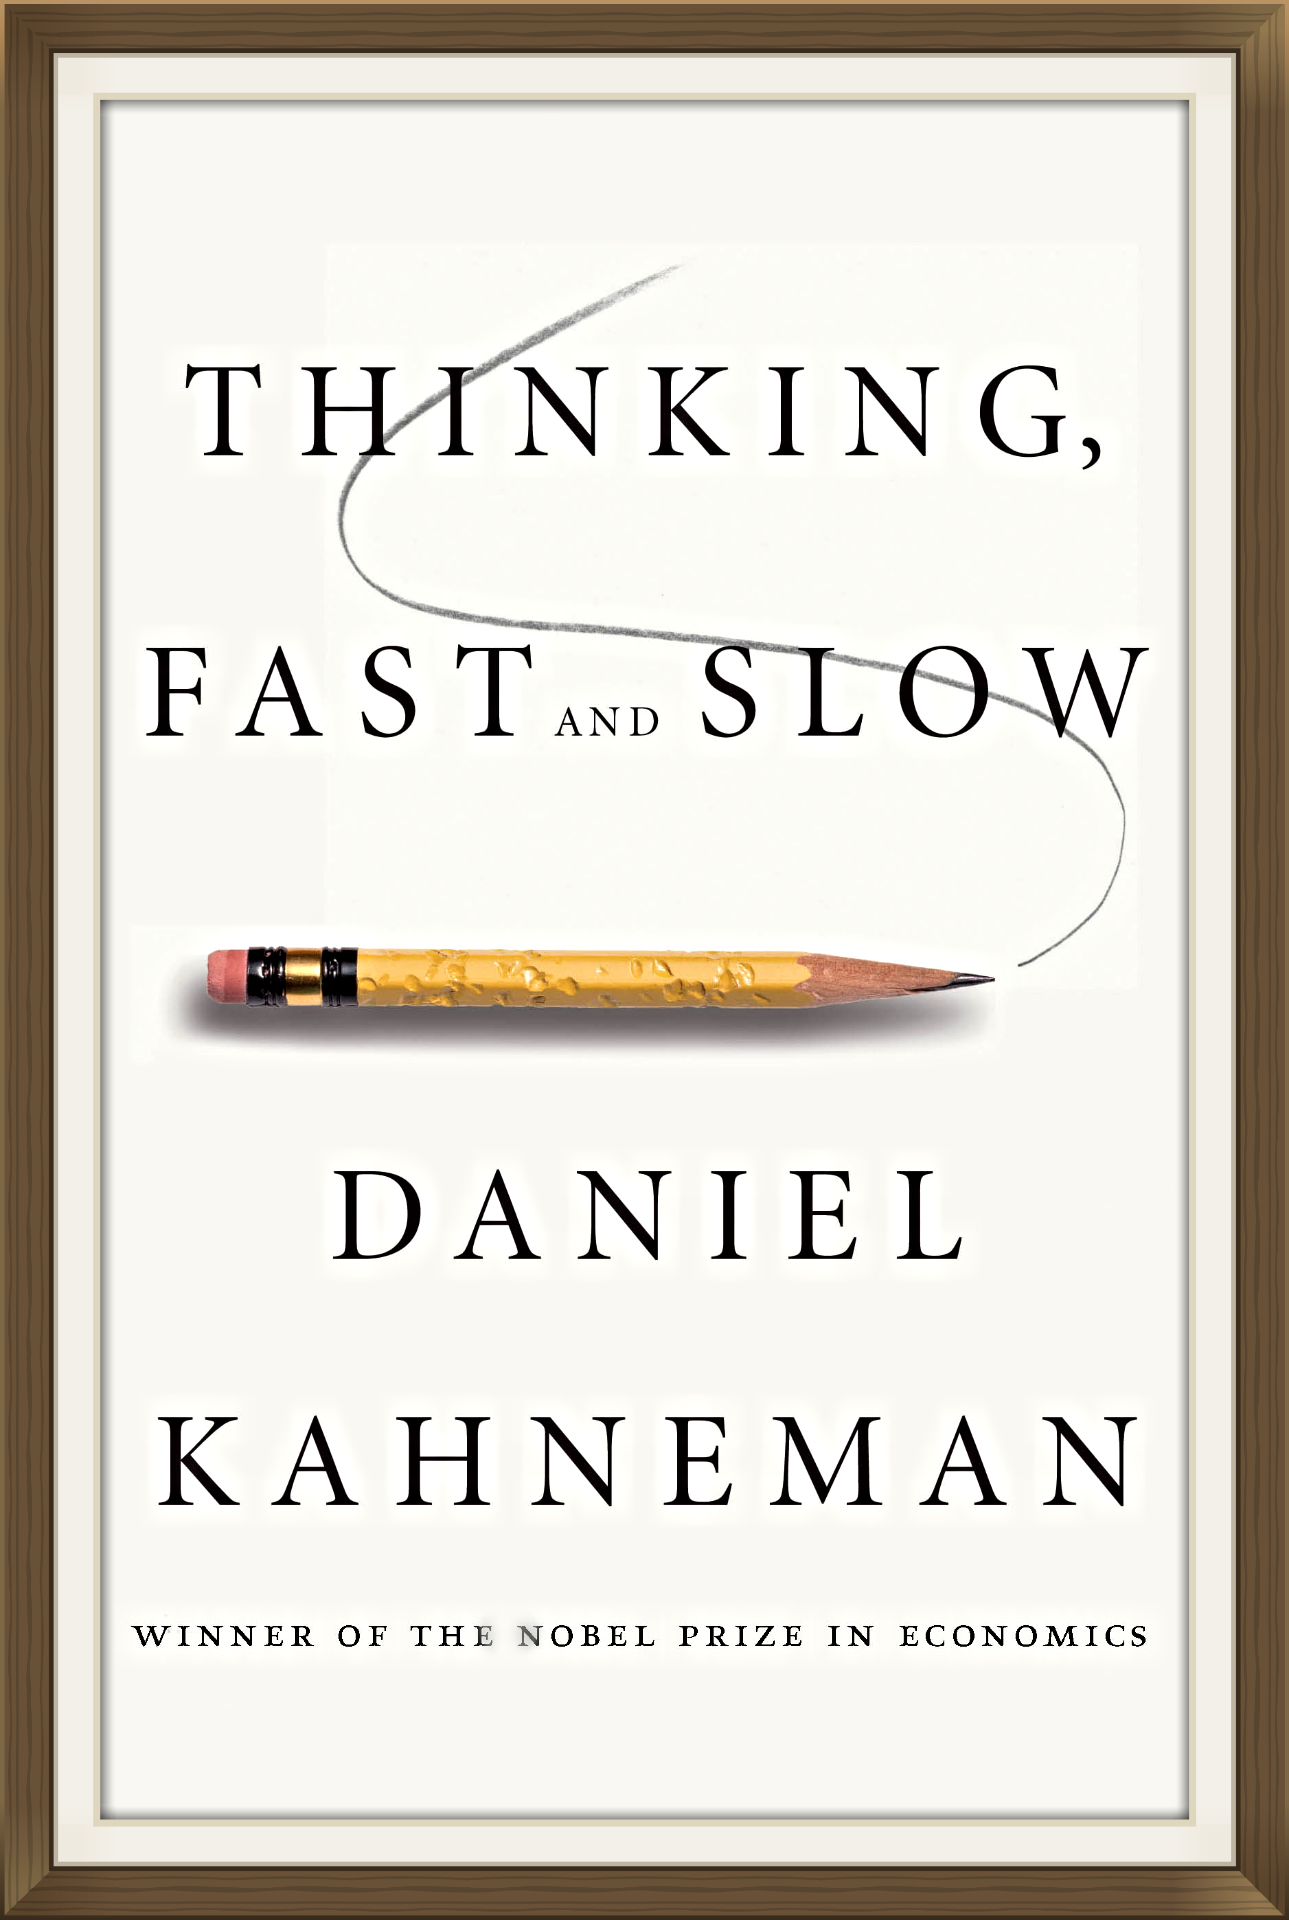 Thinking, Fast and Slow book quotes